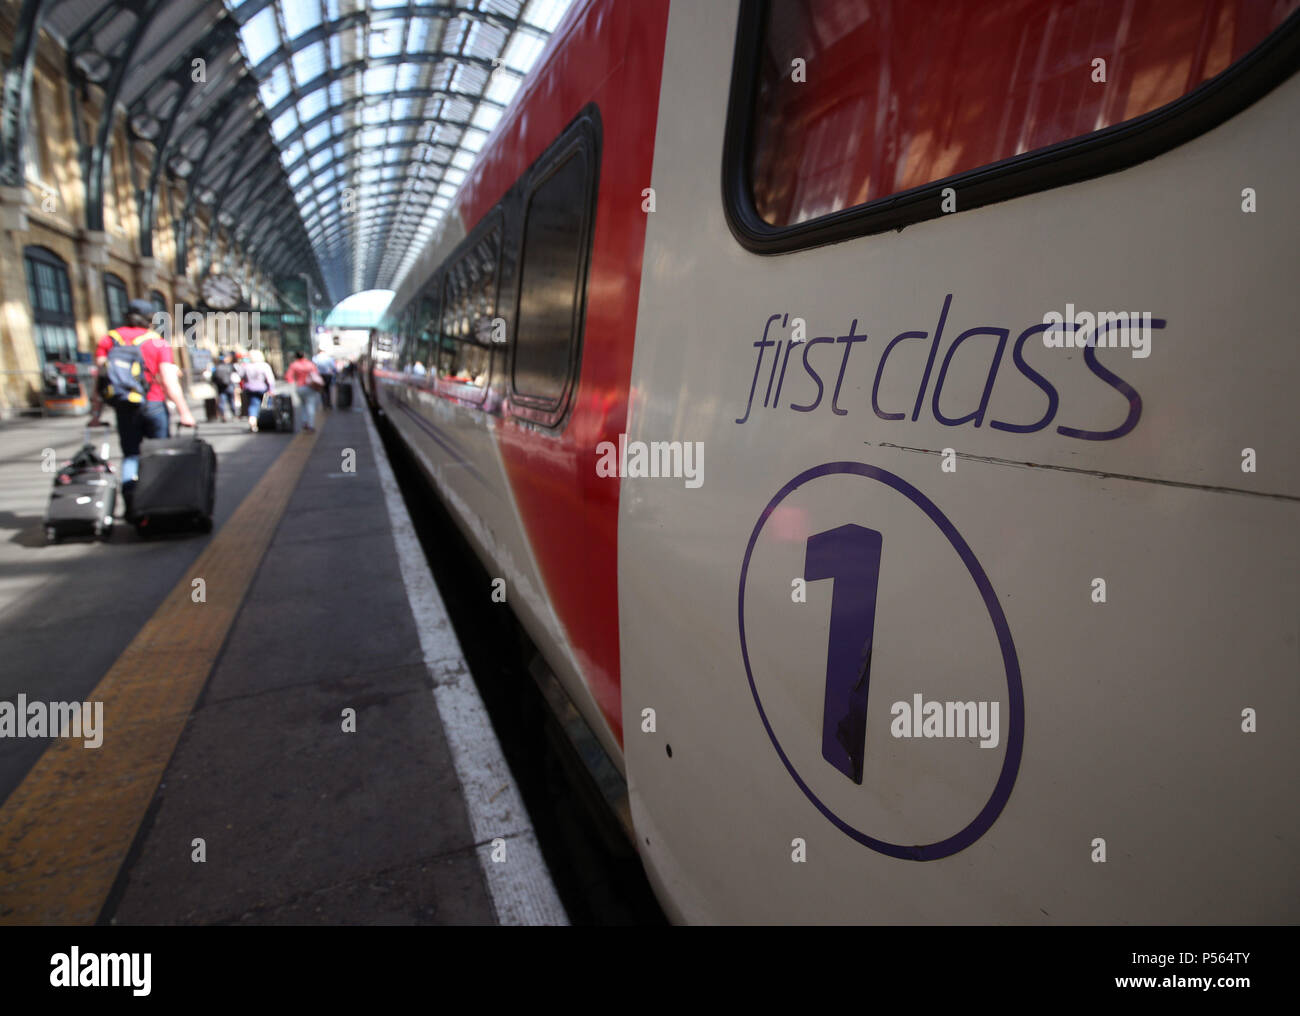 Passengers boarding a London North Eastern Railway (LNER) train during the launch event for the new service, which replaces the failed rail franchise Virgin Trains East Coast (VTEC), at Kings Cross station in London. Stock Photo